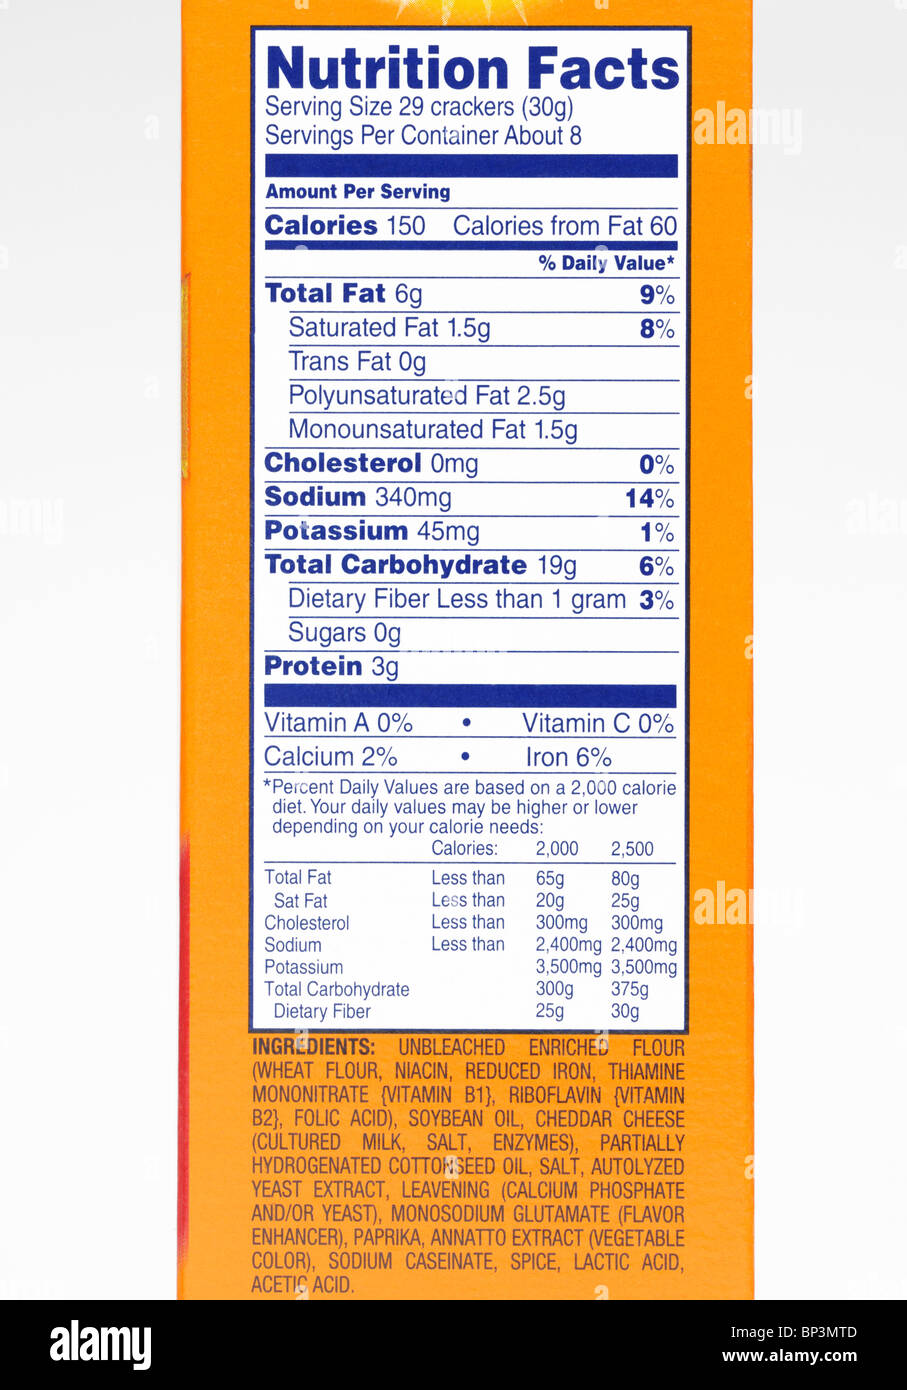 Nutrition facts label from a box of crackers. Stock Photo